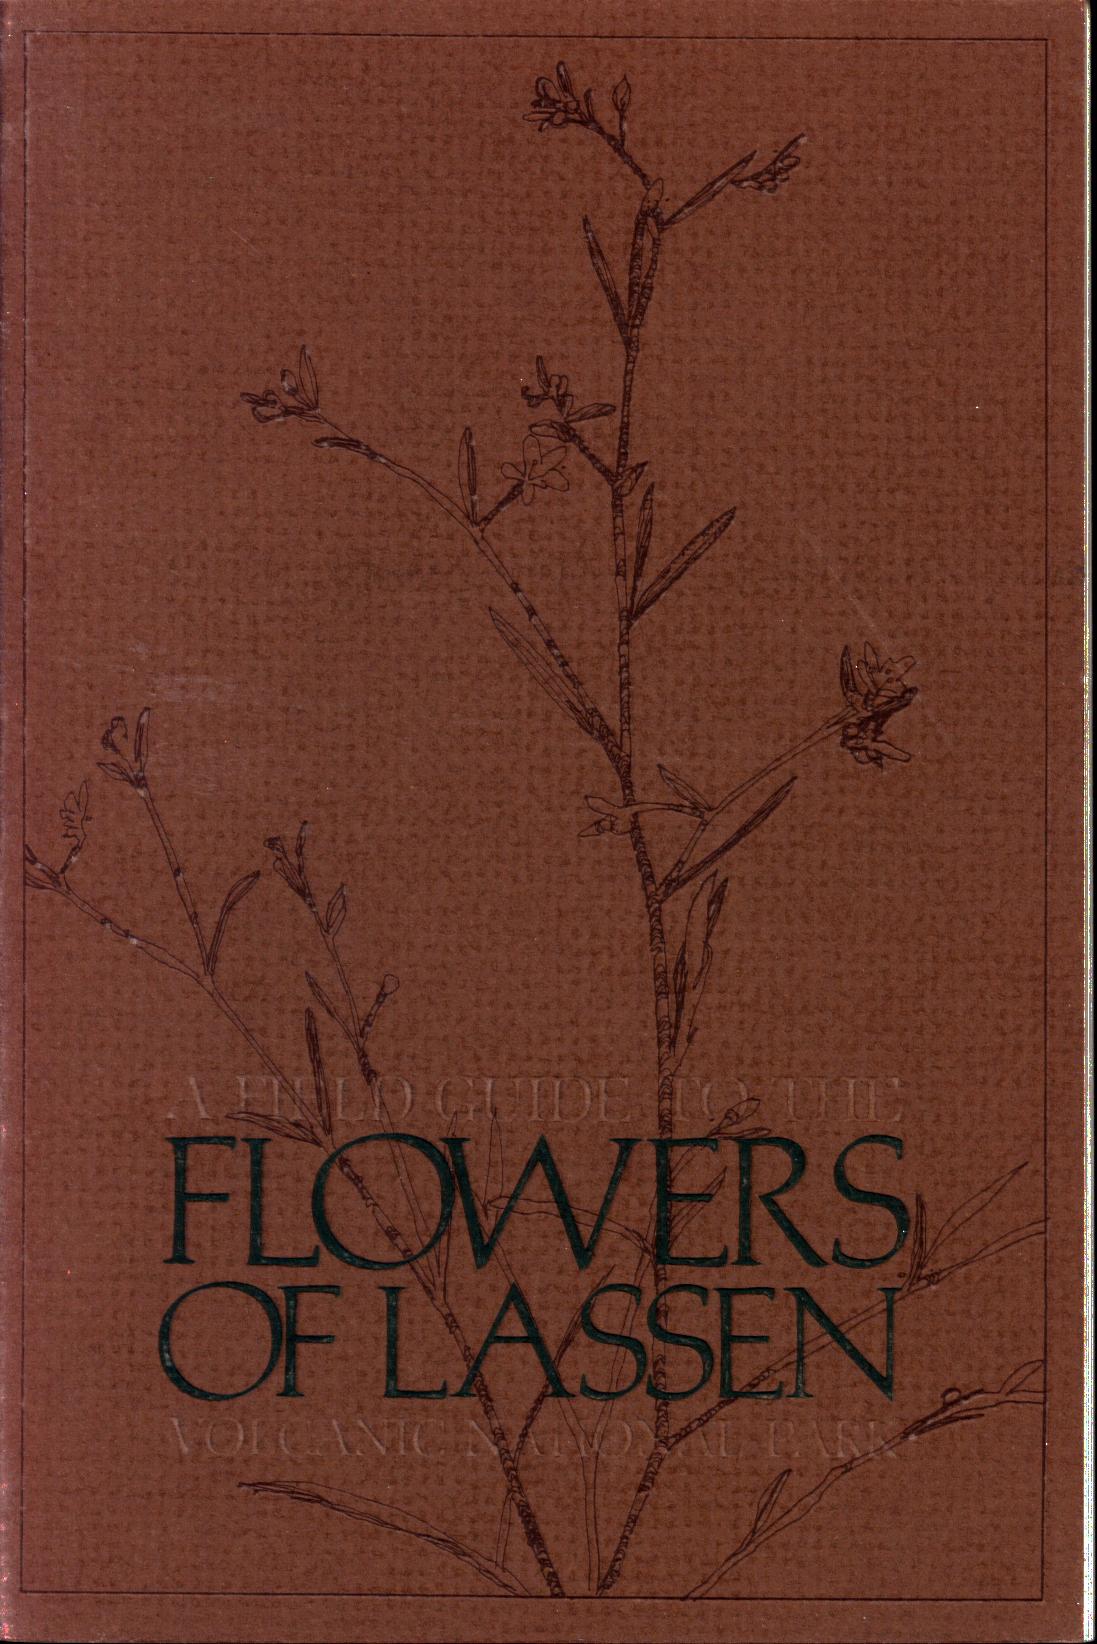 A FIELD GUIDE TO THE FLOWERS OF LASSEN VOLCANIC NATIONAL PARK. by Mary Ann Showers & David W. Showers. 